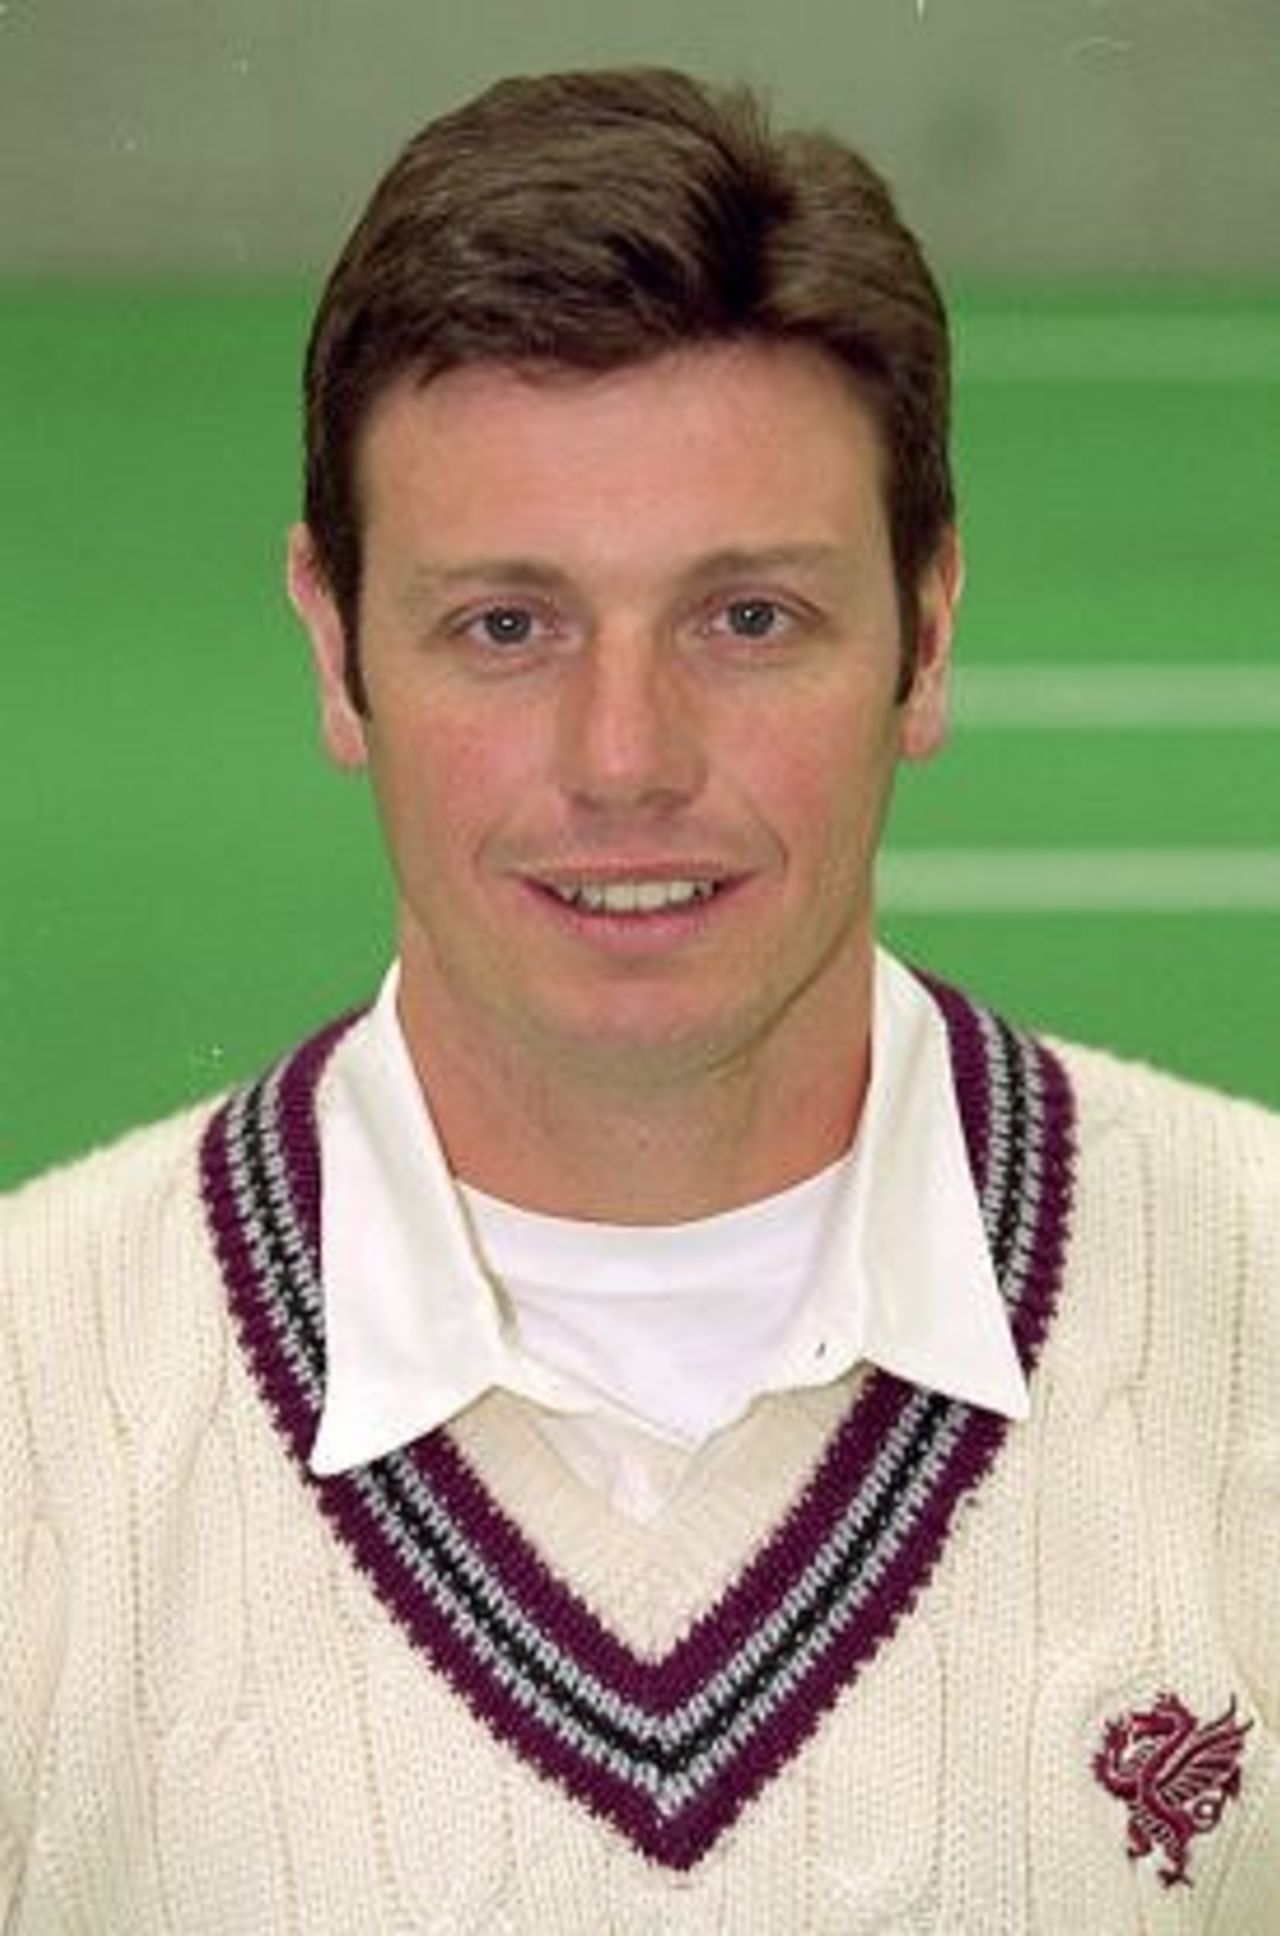 11 Apr 2000: Portrait of Graham Rose taken during a Somerset County Cricket Club photocall at Taunton in England.